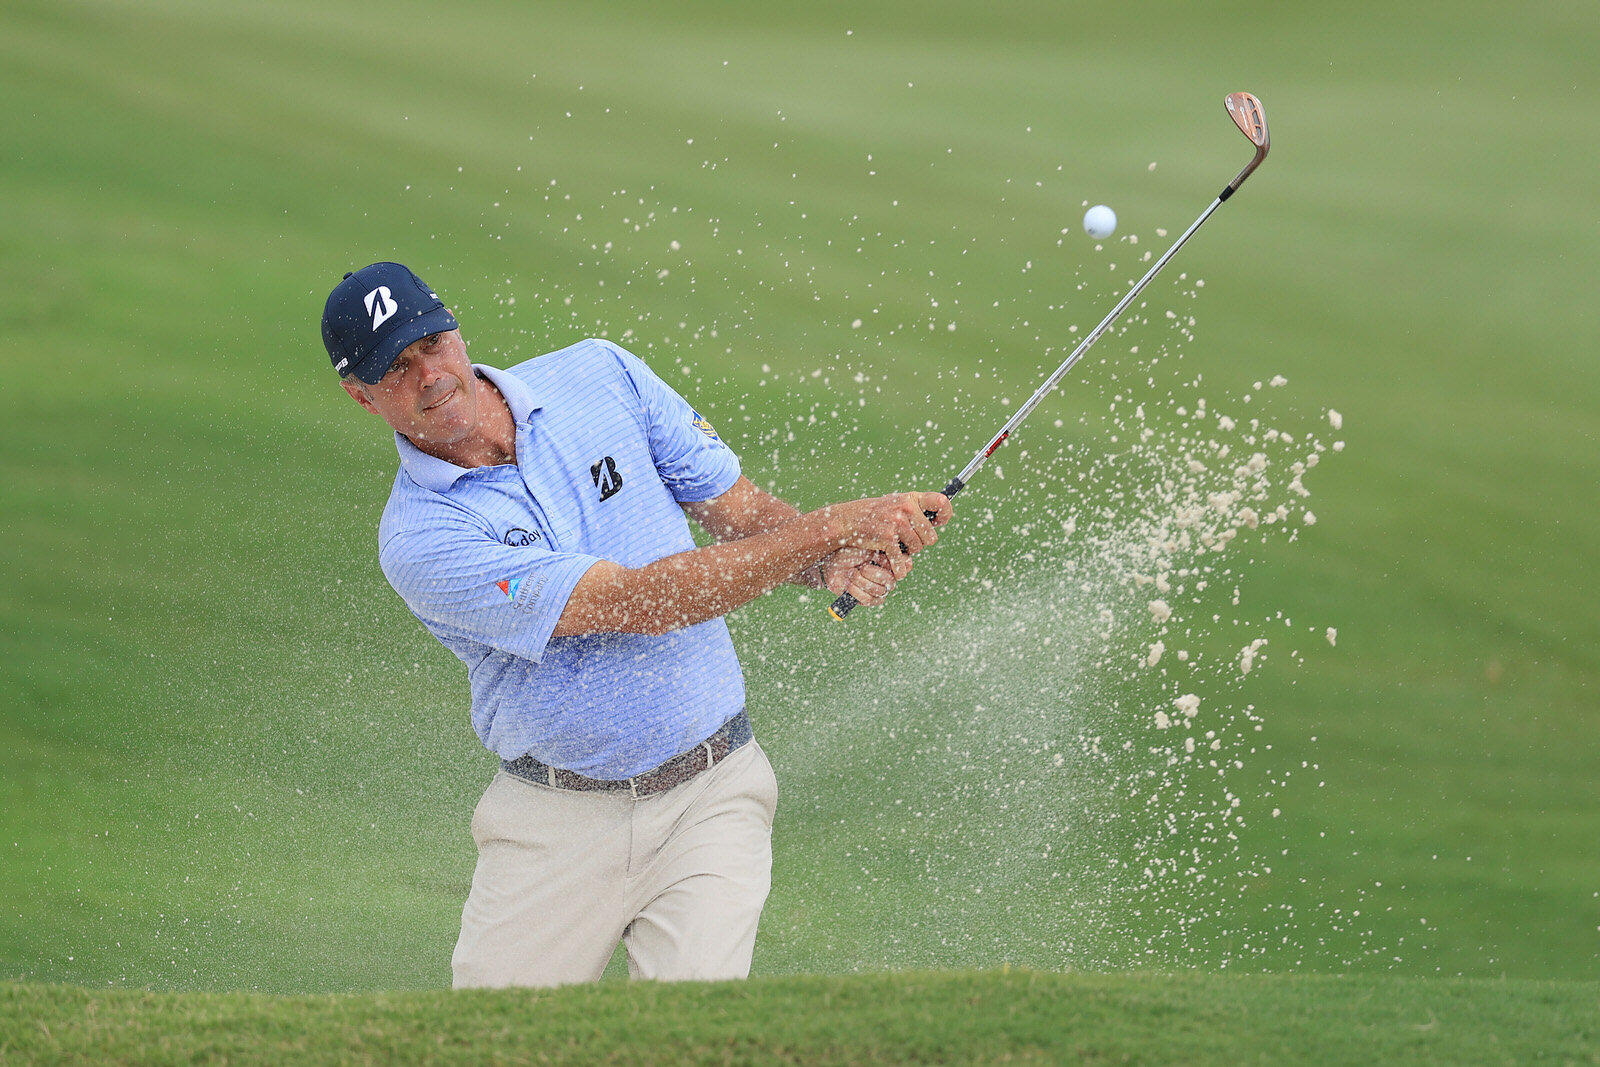  MEMPHIS, TENNESSEE - JULY 30: Matt Kuchar of the United States plays a shot from a bunker on the 16th hole during the first round of the World Golf Championship-FedEx St Jude Invitational at TPC Southwind on July 30, 2020 in Memphis, Tennessee. (Pho